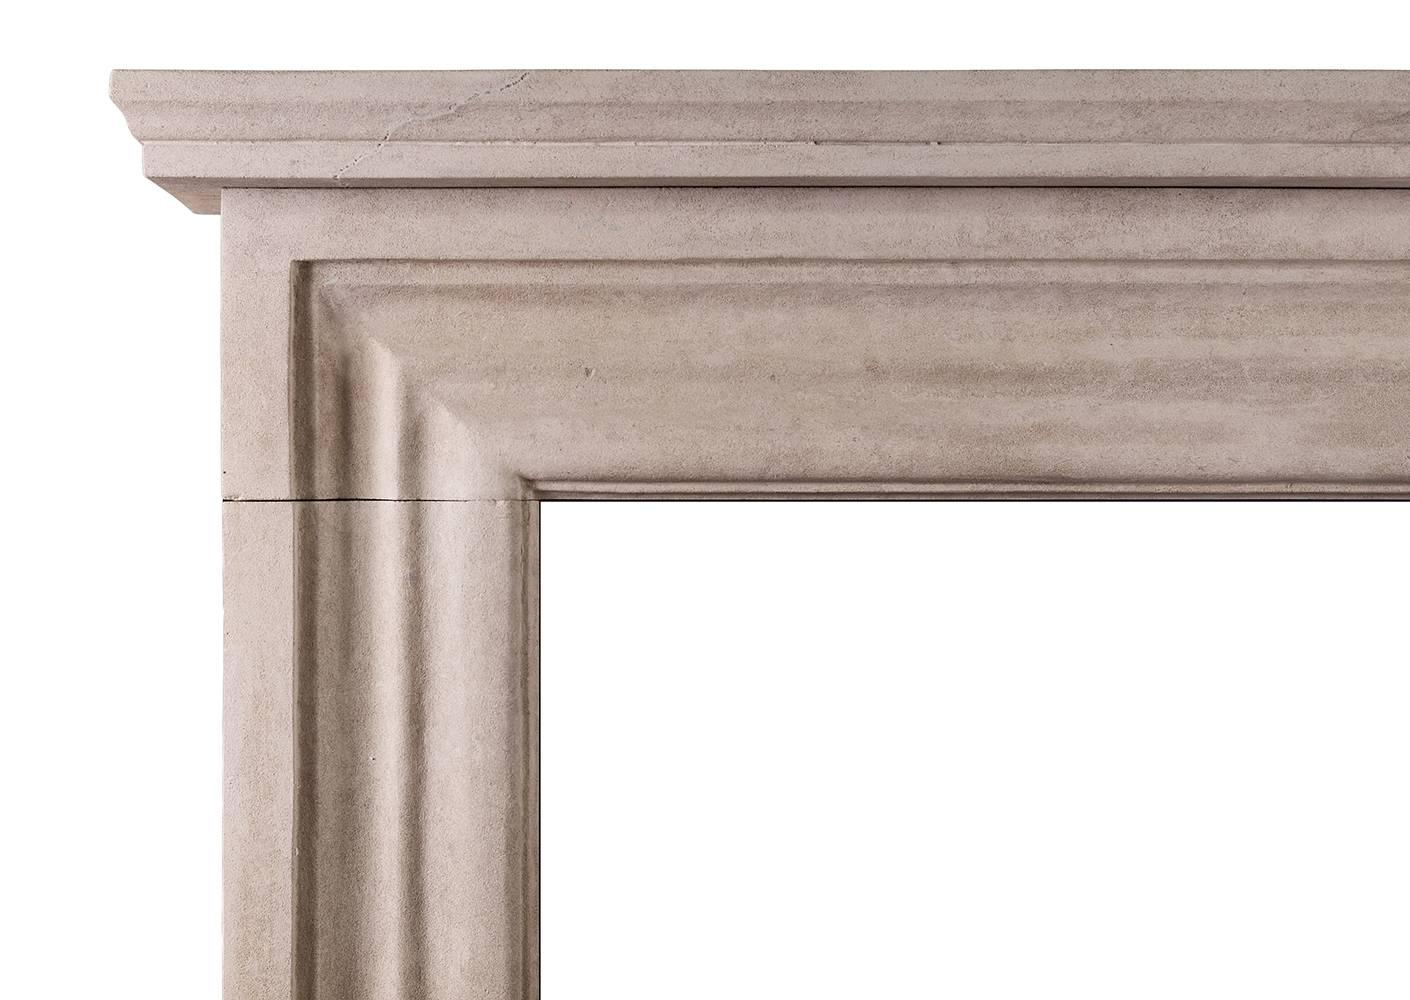 A large and imposing English moulded bolection fireplace in Bath stone. Modelled on a chimneypiece originally housed in the Officer’s mess at Chelsea Barracks, London. Can be made to any size in various materials.

Measures: Shelf width 1965 mm 77